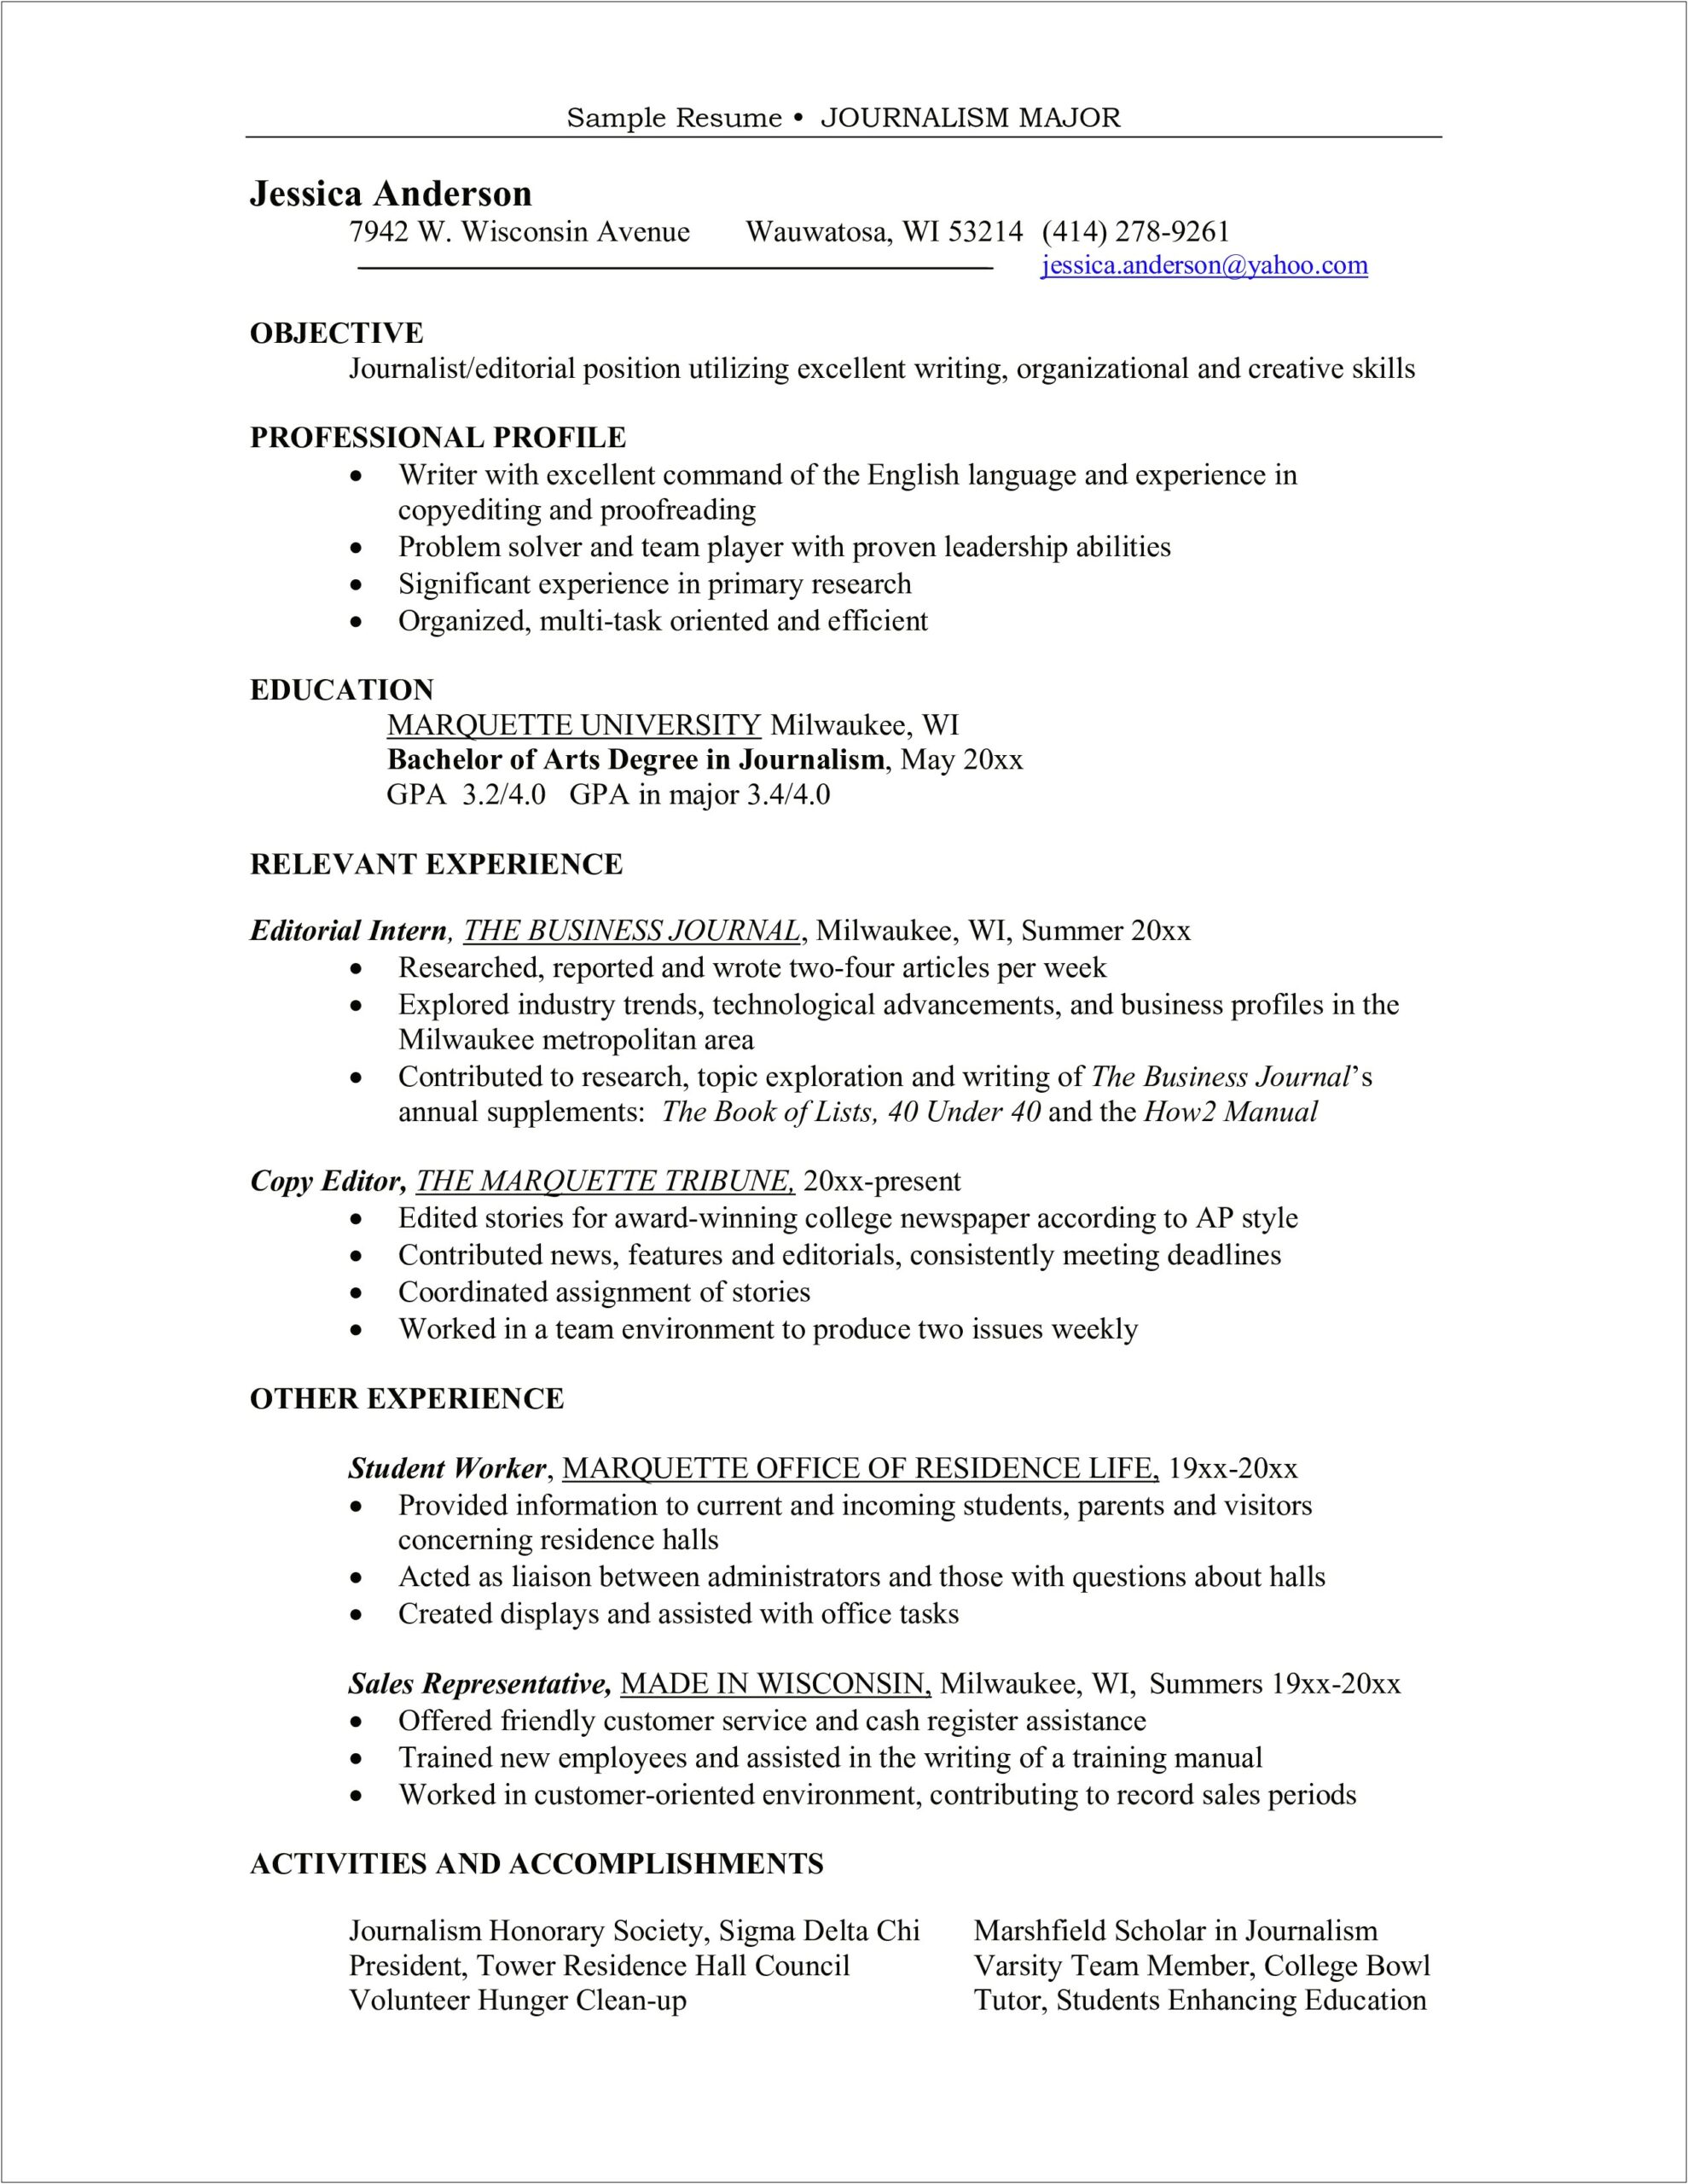 Is Team Player A Skill For Resume